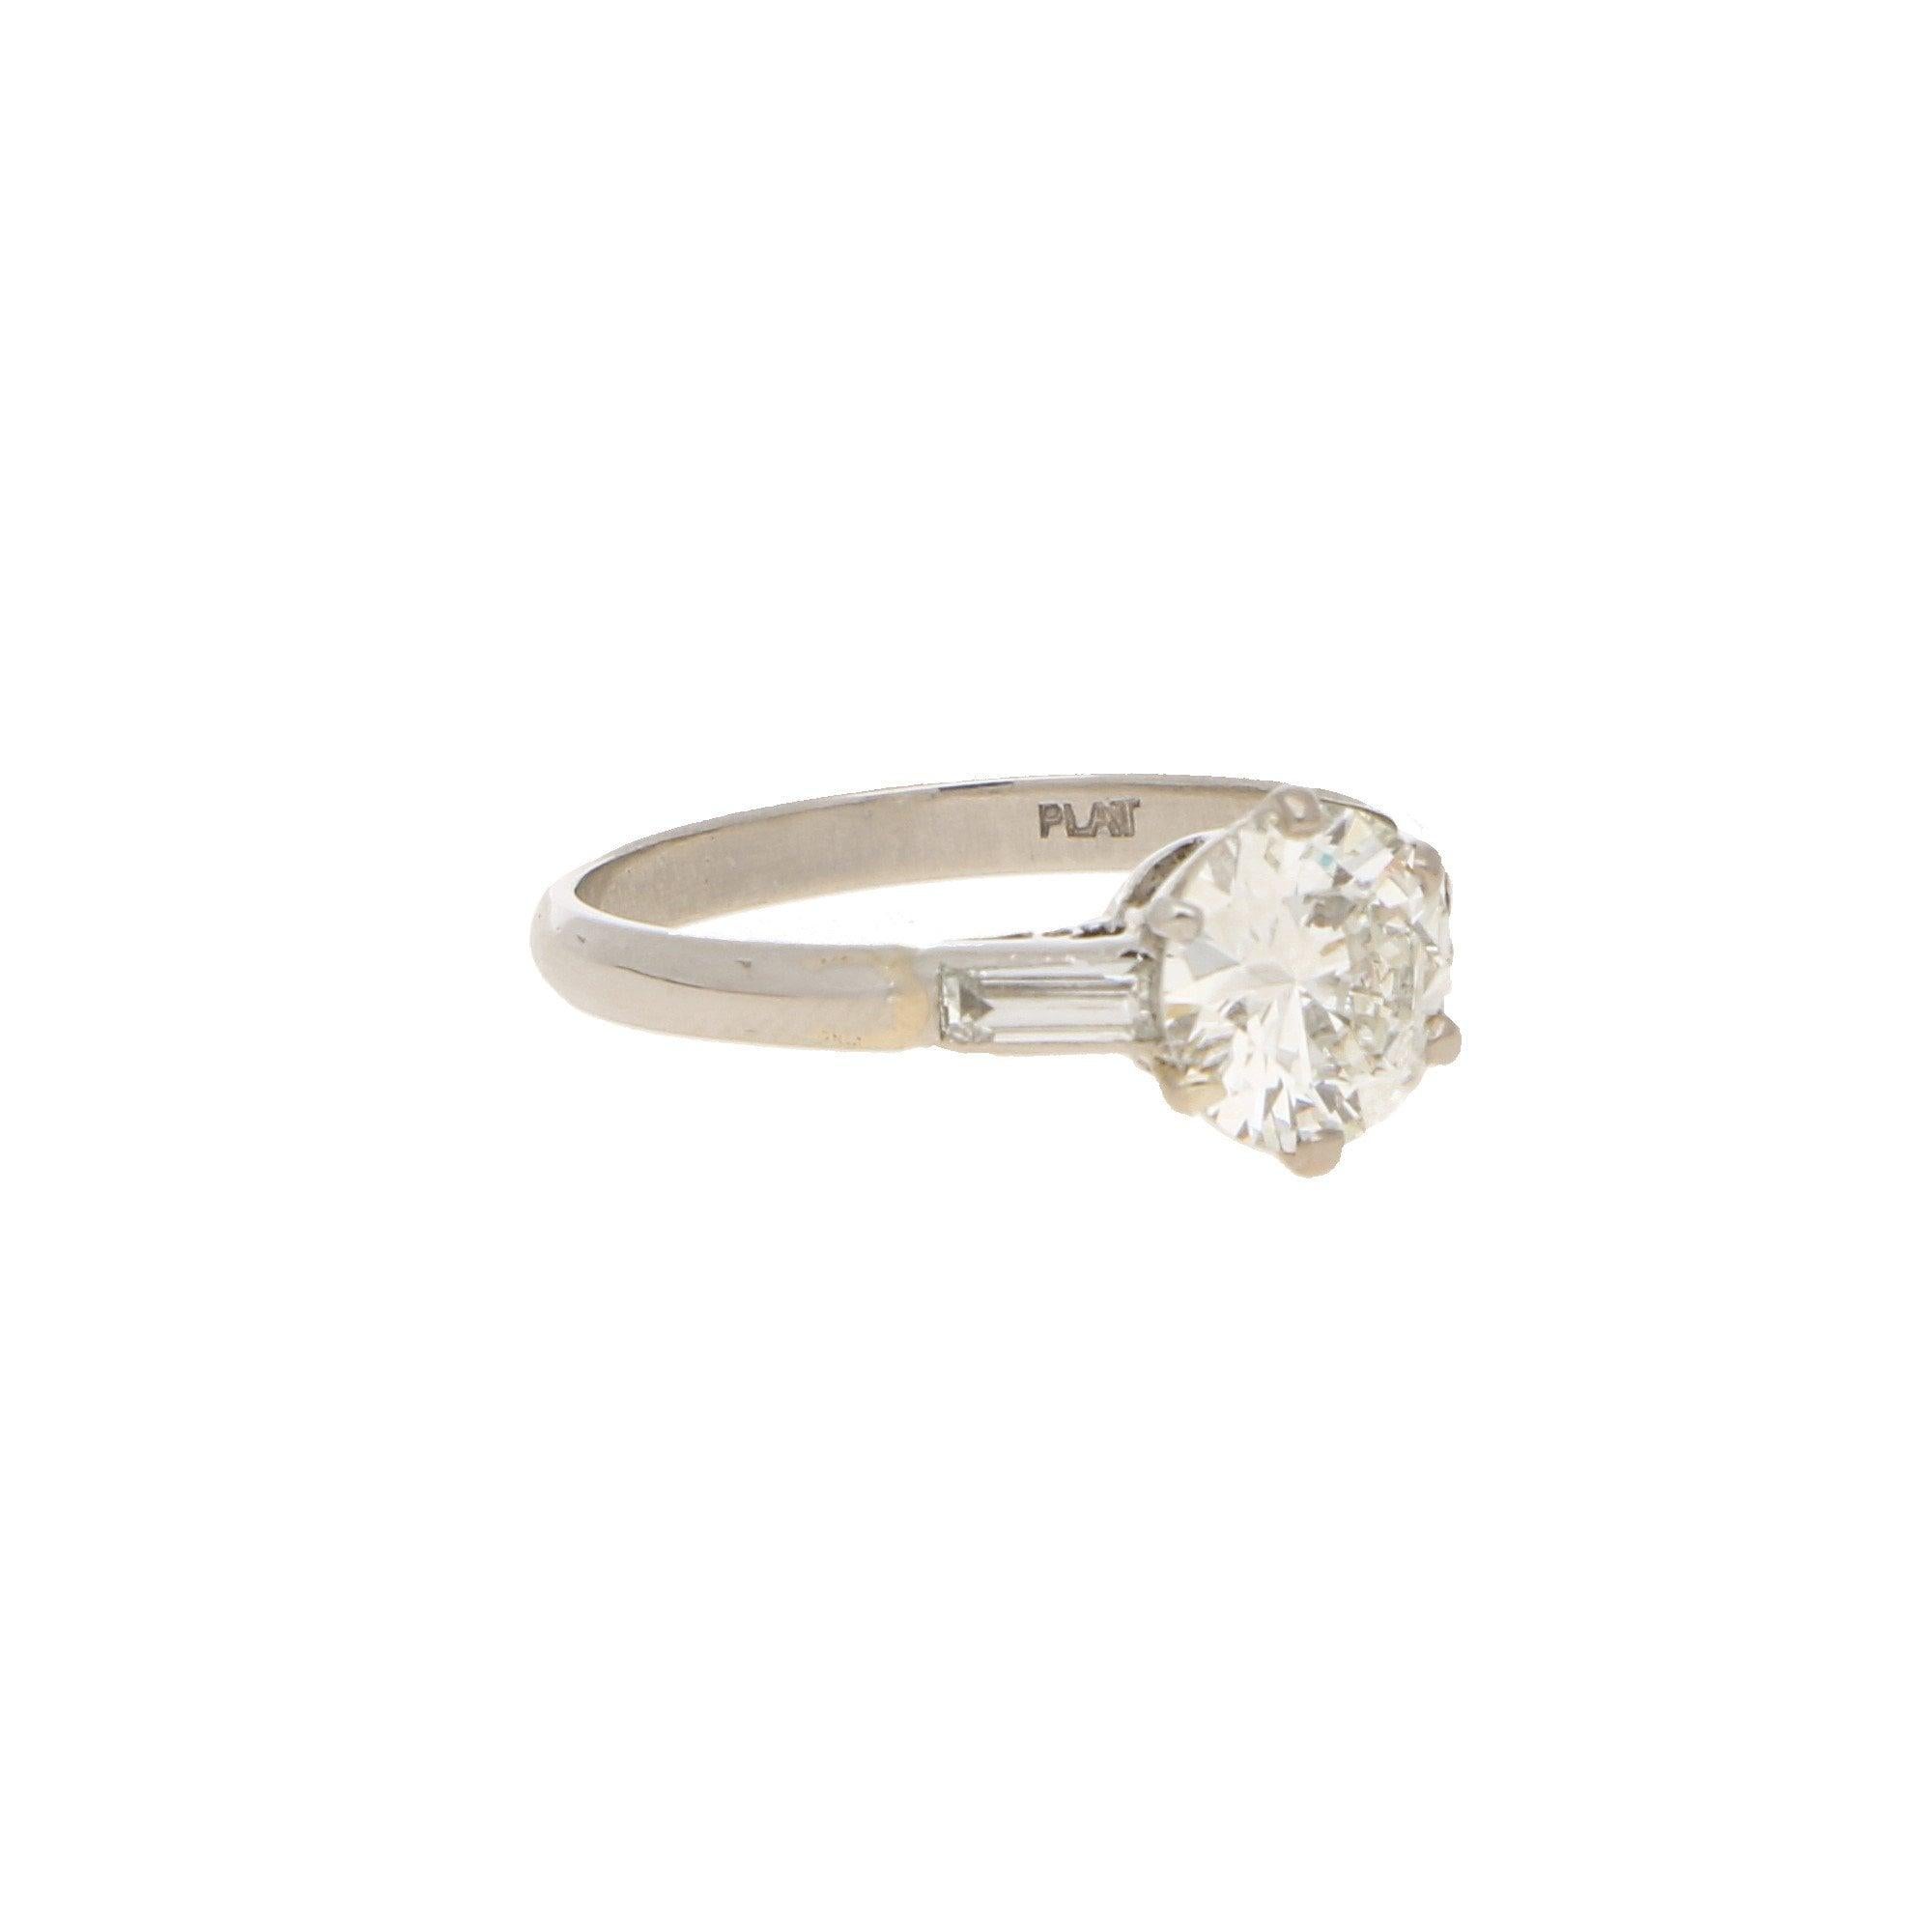 3 ct solitaire engagement rings